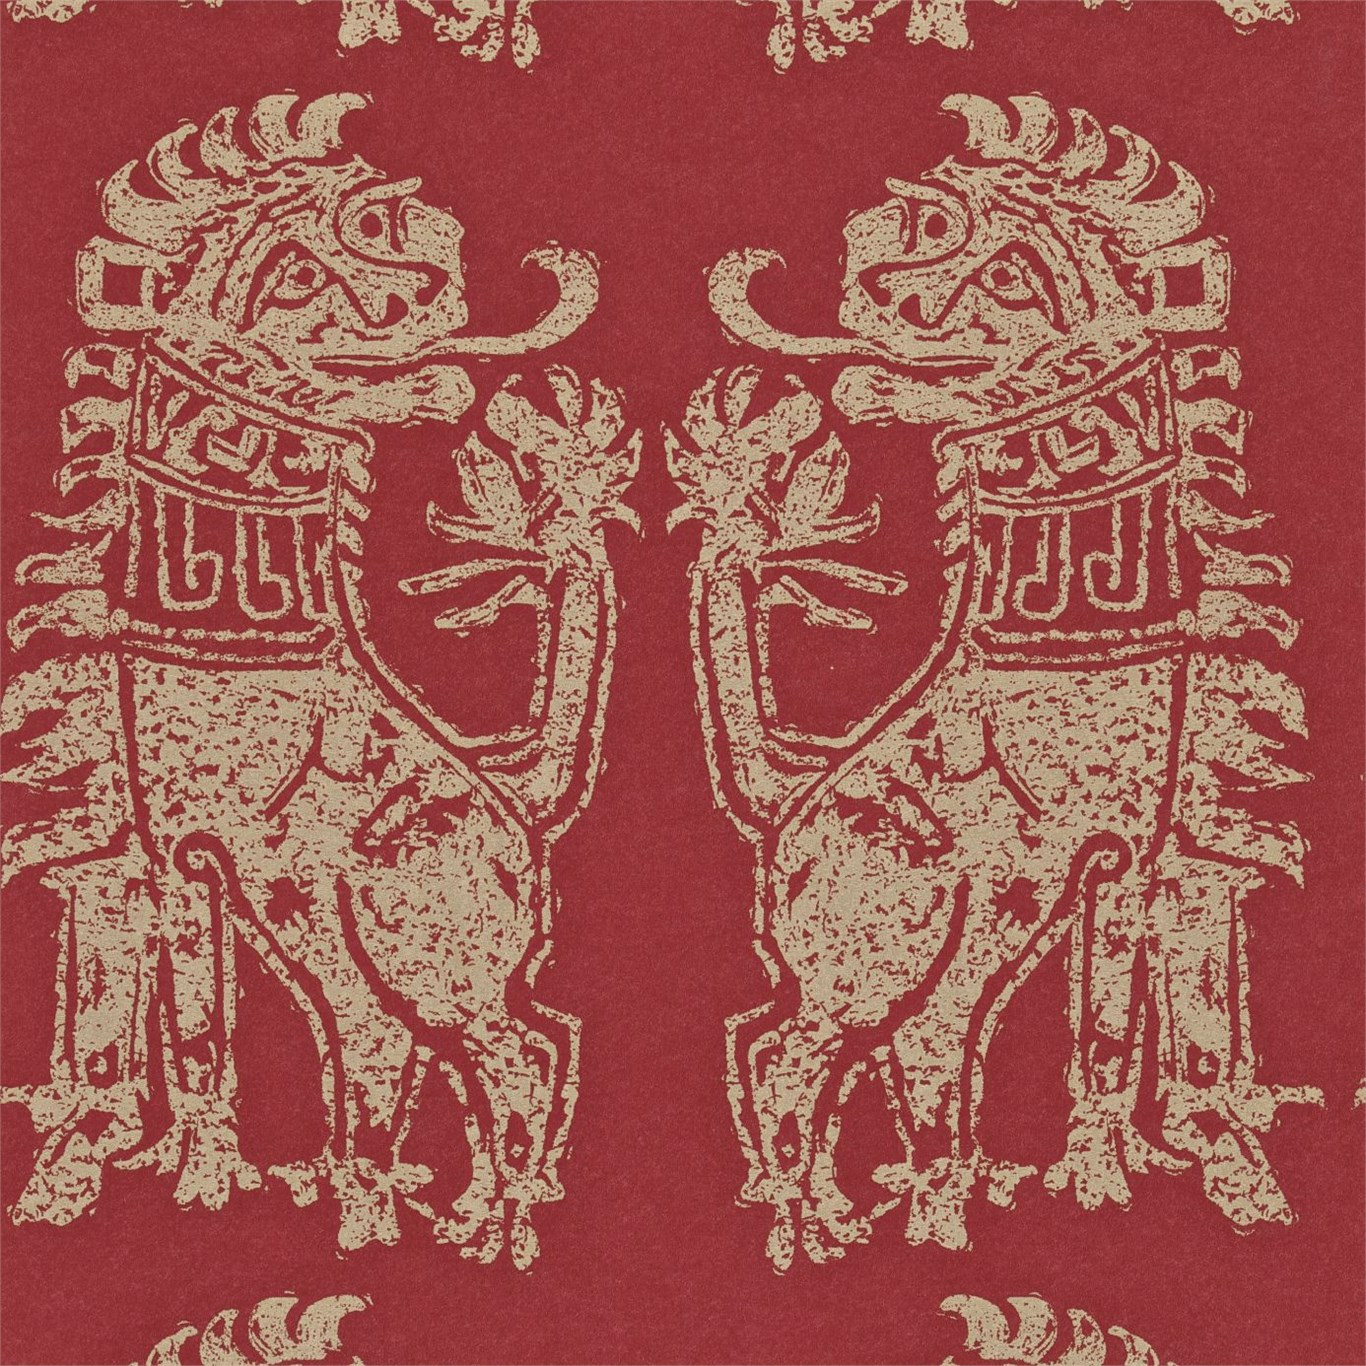 Sicilian Lions Red/Gold Wallpaper by SAN